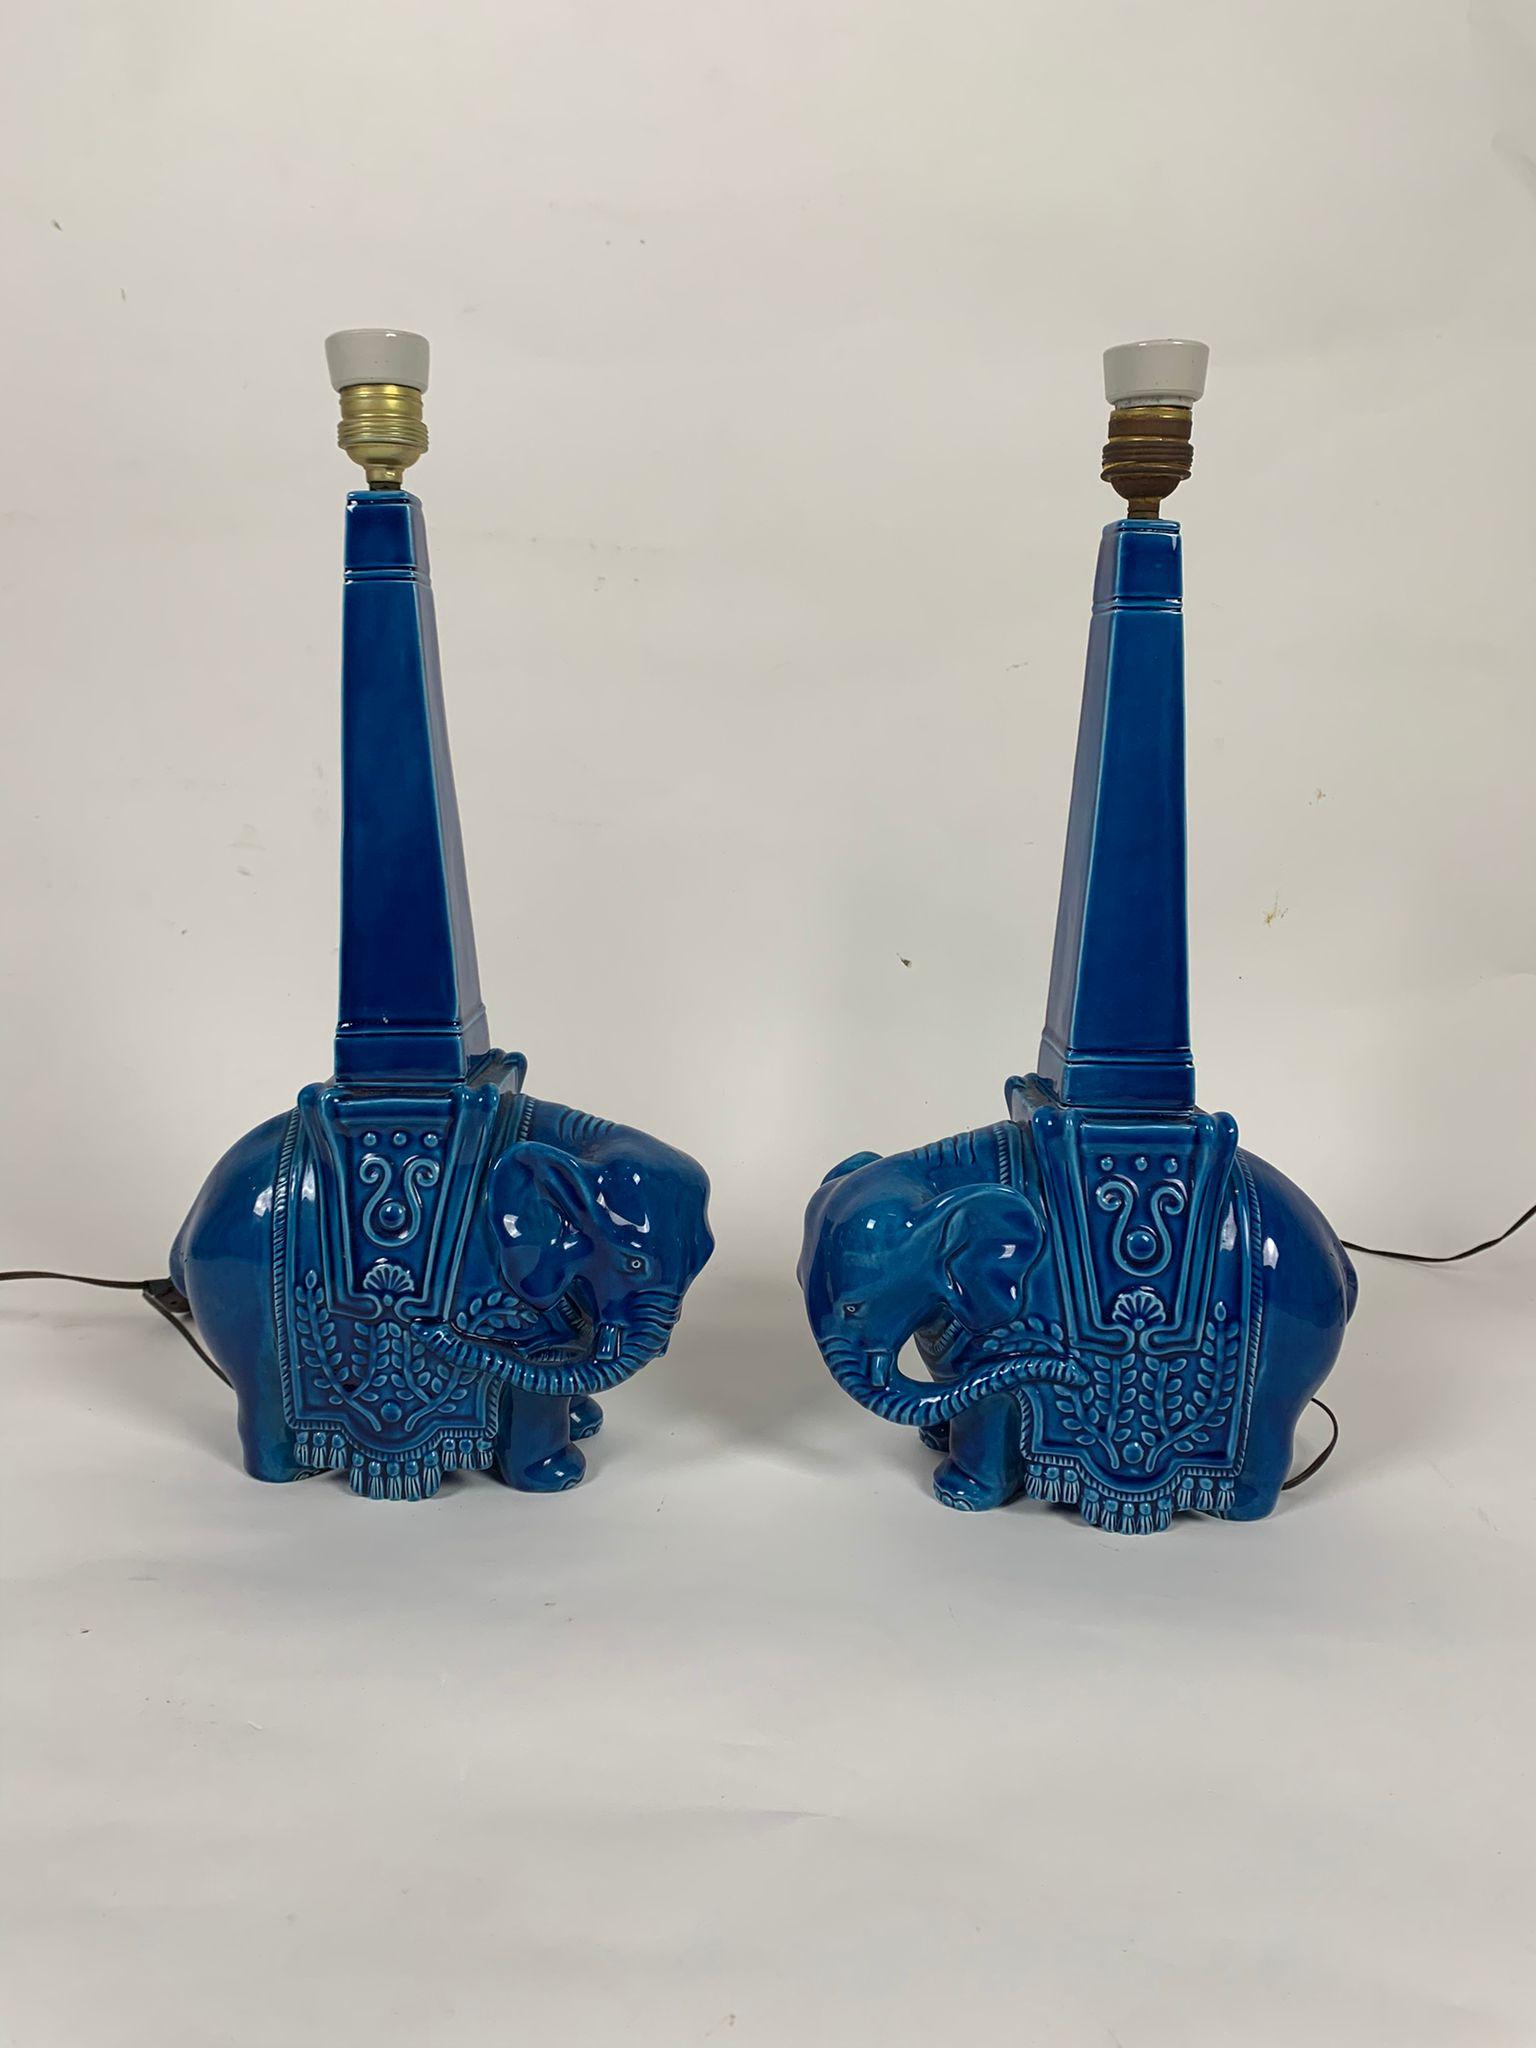 Pair of blue ceramic table lamps representing elephants, Italy, 1960s

Pair of ceramic lamps of Italian manufacture from the 1960s depicting two elephants. 
Very good condition of the ceramic bases.

Measurements 120 x 100 x 20h cm 